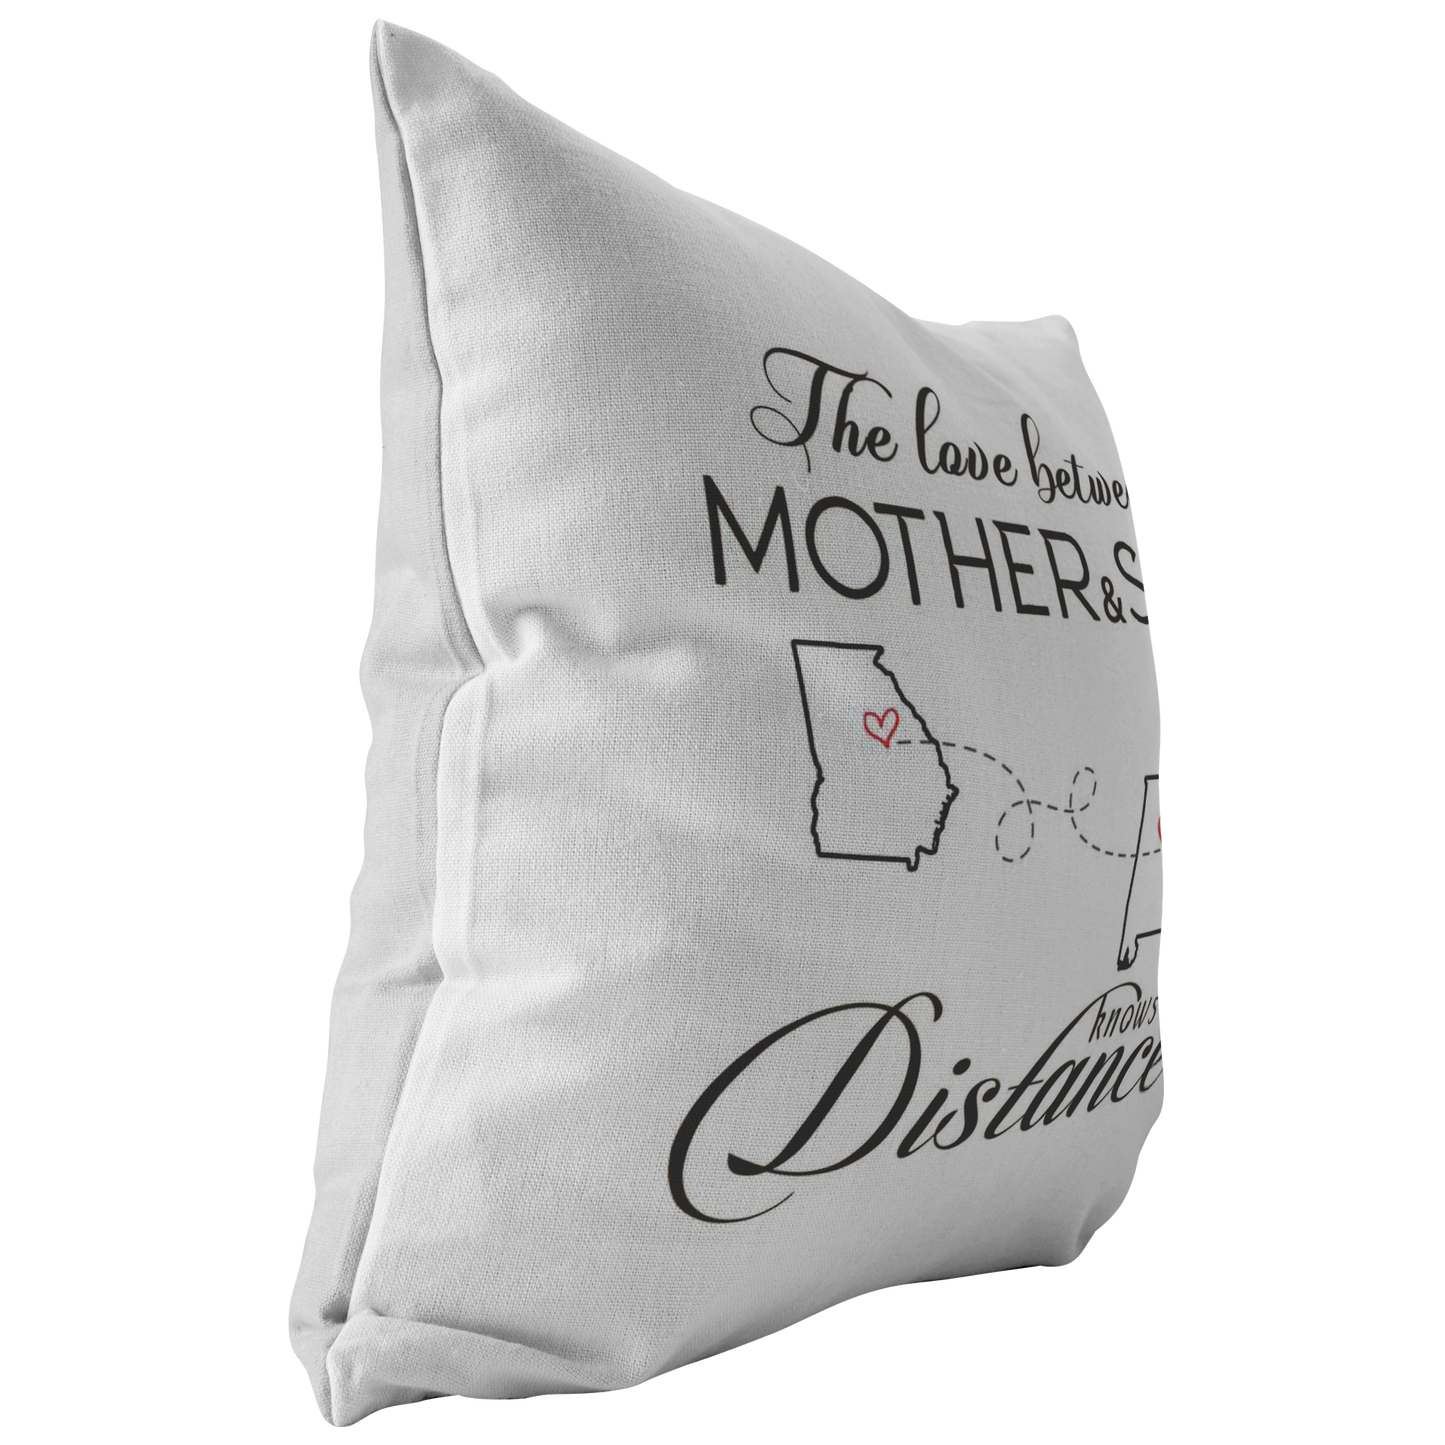 ND-pl20862103-sp-25448 - [ Georgia | Alabama ] (PI_ThrowPillowCovers) Happy Mothers Day Pillow Covers 18x18 - The Love Between Mot